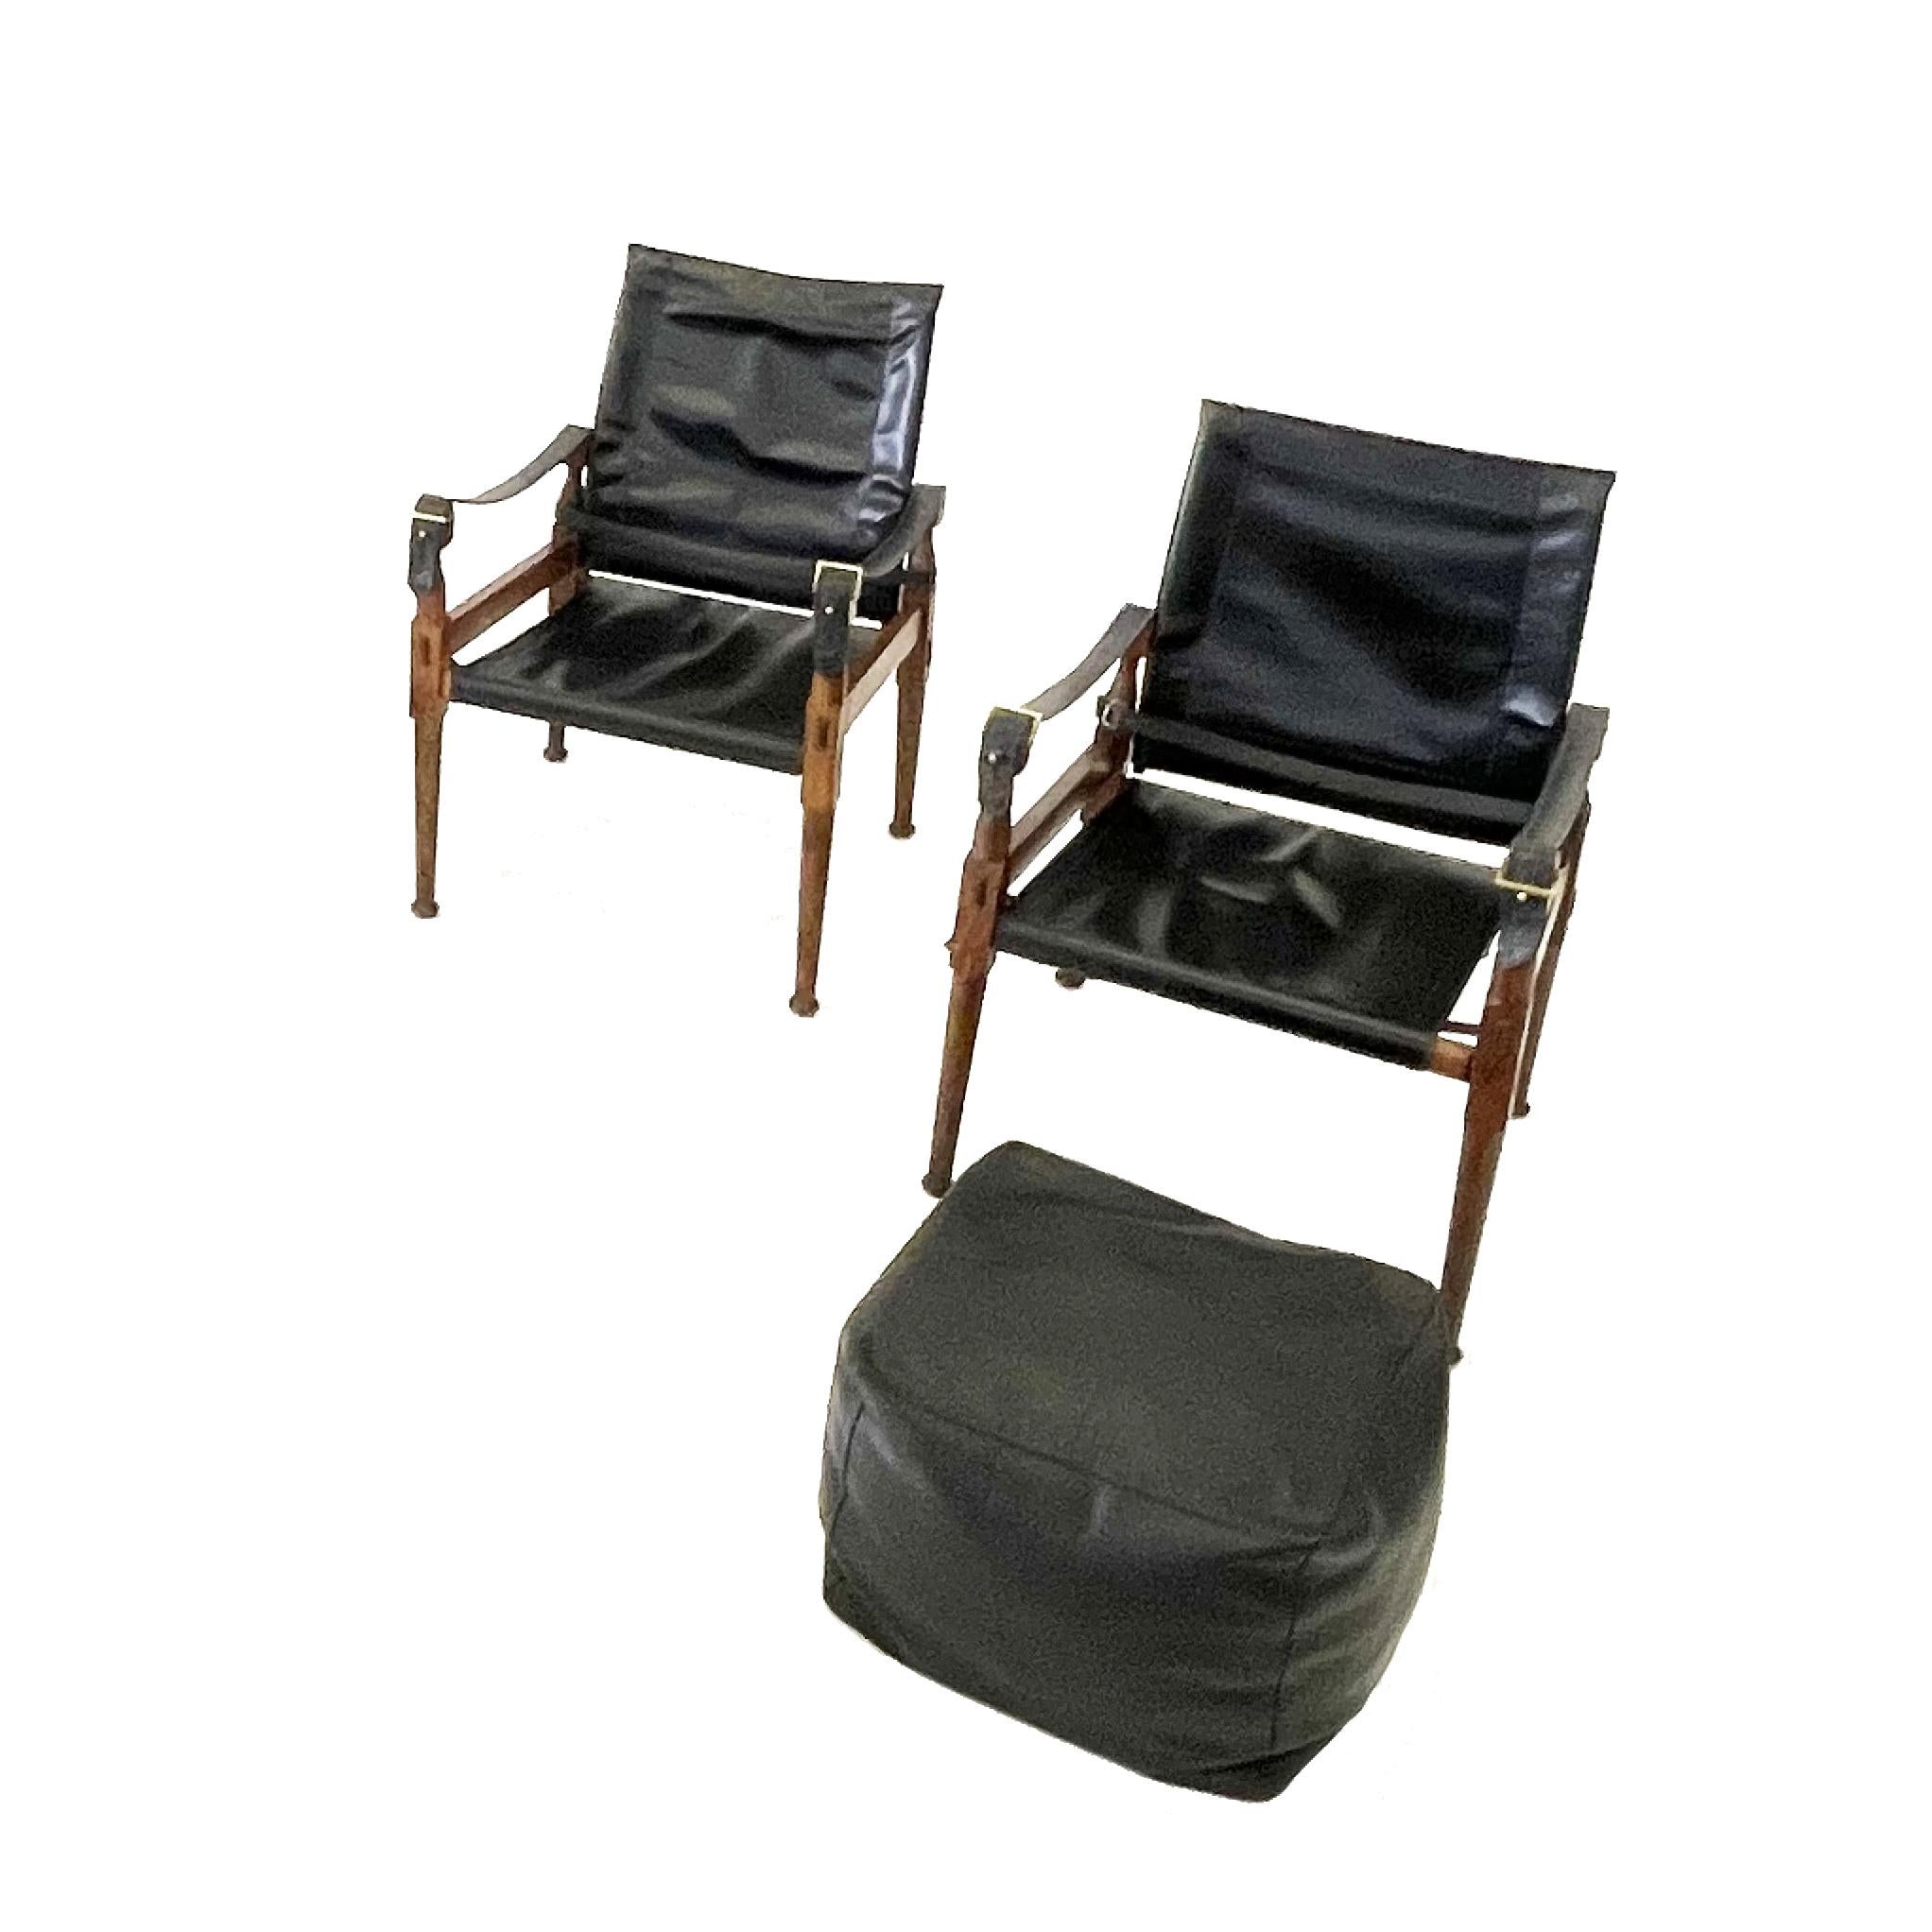 'Safari' lounge chairs and ottoman, wood, black leather and brass, Pakistan, 1970s
Two chairs and one Ottoman

This 'Safari' armchair shows very elegant and well designed lines, in combination with carefully crafted wood joints. The black leather